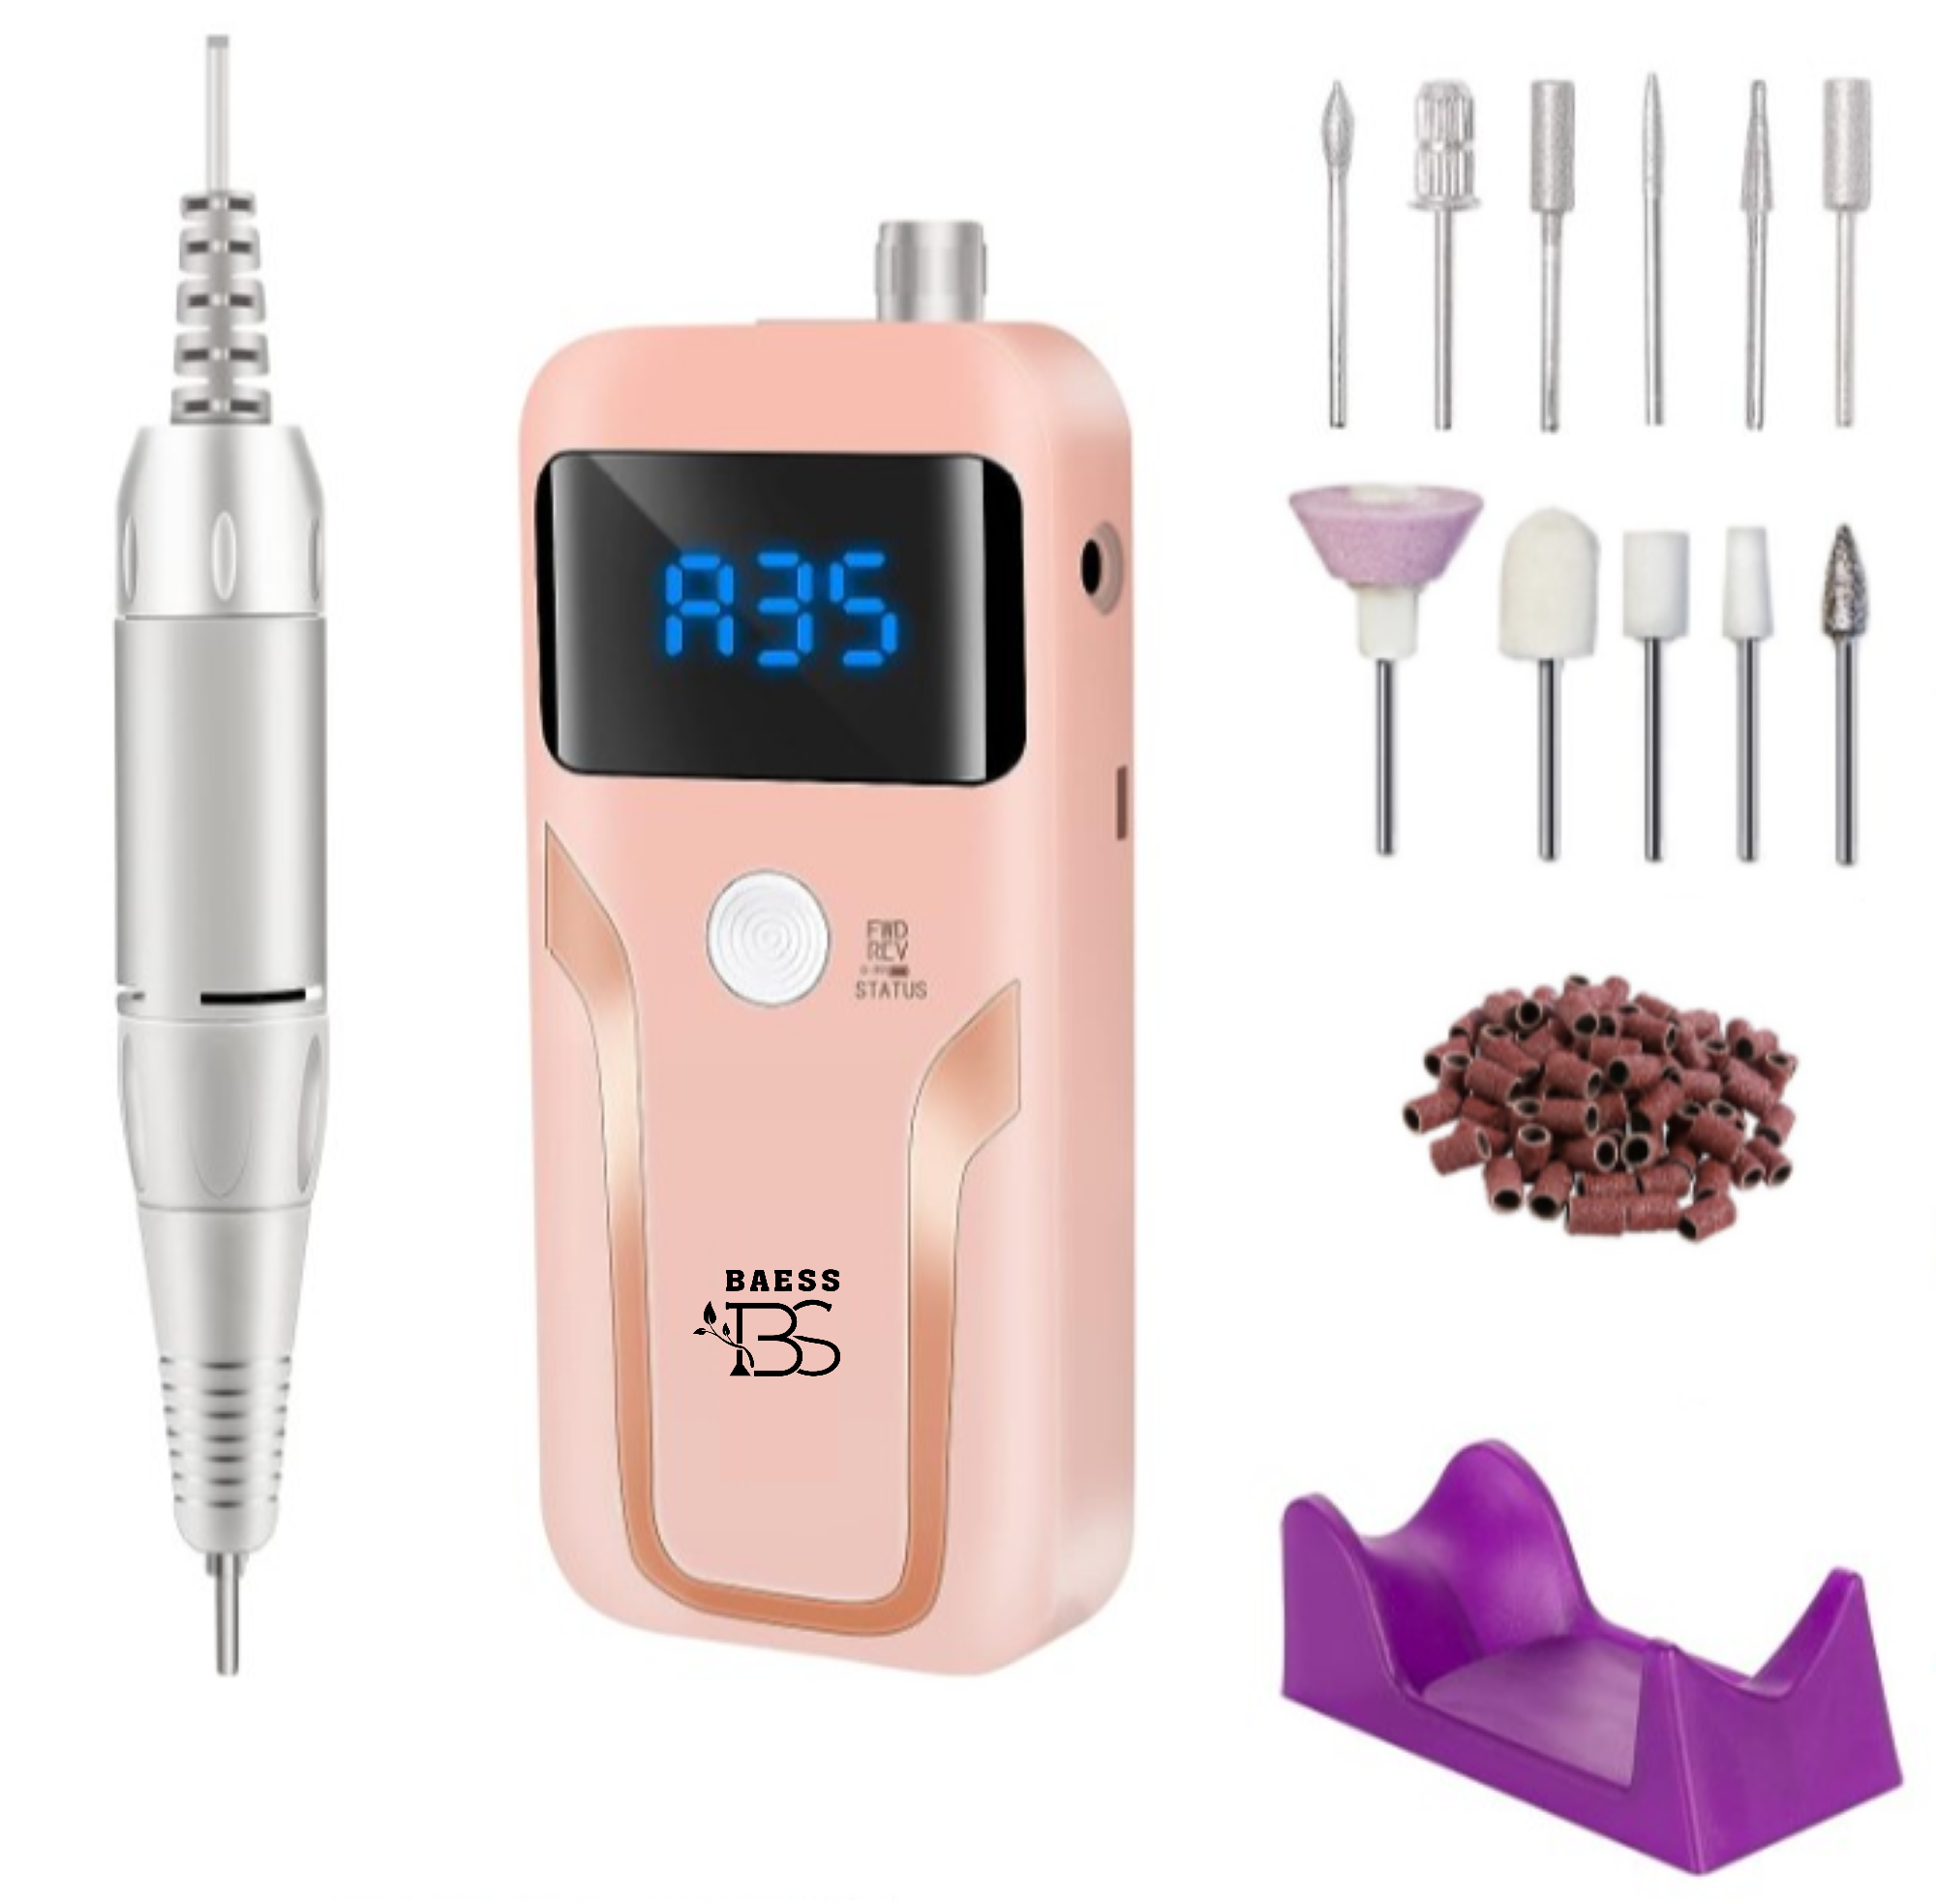 Nail grinder complete set - 35000 RPM - Electric nail file - Manicure & Pedicure - Pink